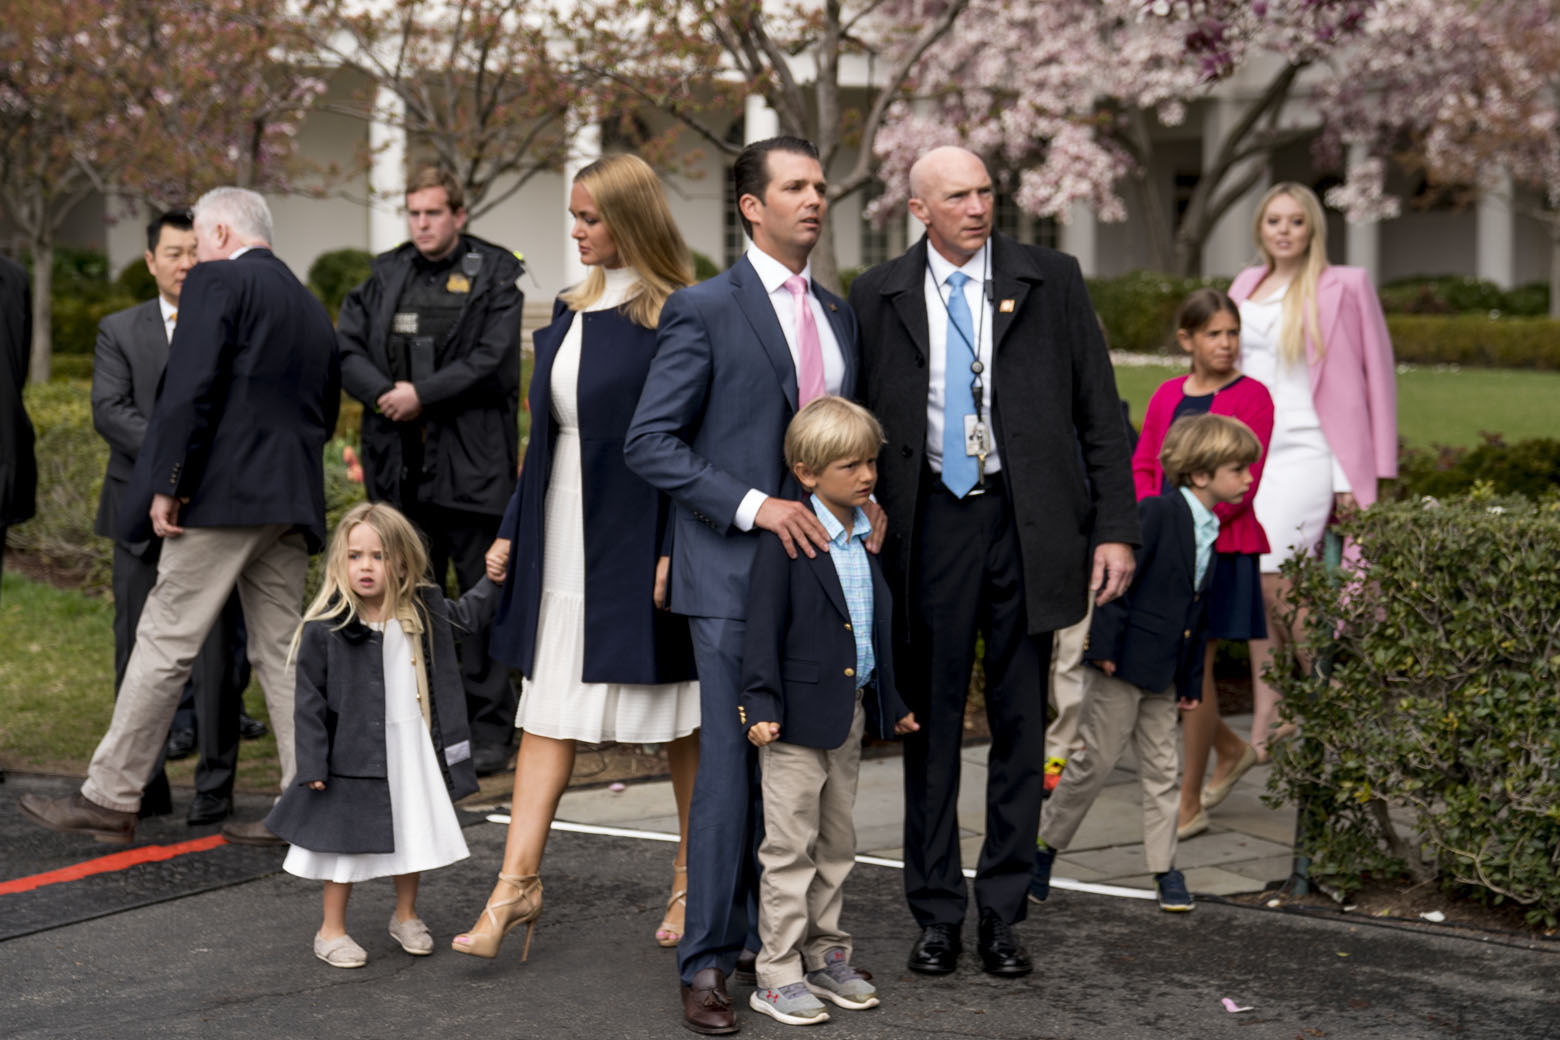 Donald Trump Jr., the son of President Donald Trump, center, and his wife Vanessa Trump, center left, arrive with children at the annual White House Easter Egg Roll on the South Lawn of the White House in Washington, Monday, April 2, 2018. Also pictured is Tiffany Trump, the Daughter of President Donald Trump, right. (AP Photo/Andrew Harnik)